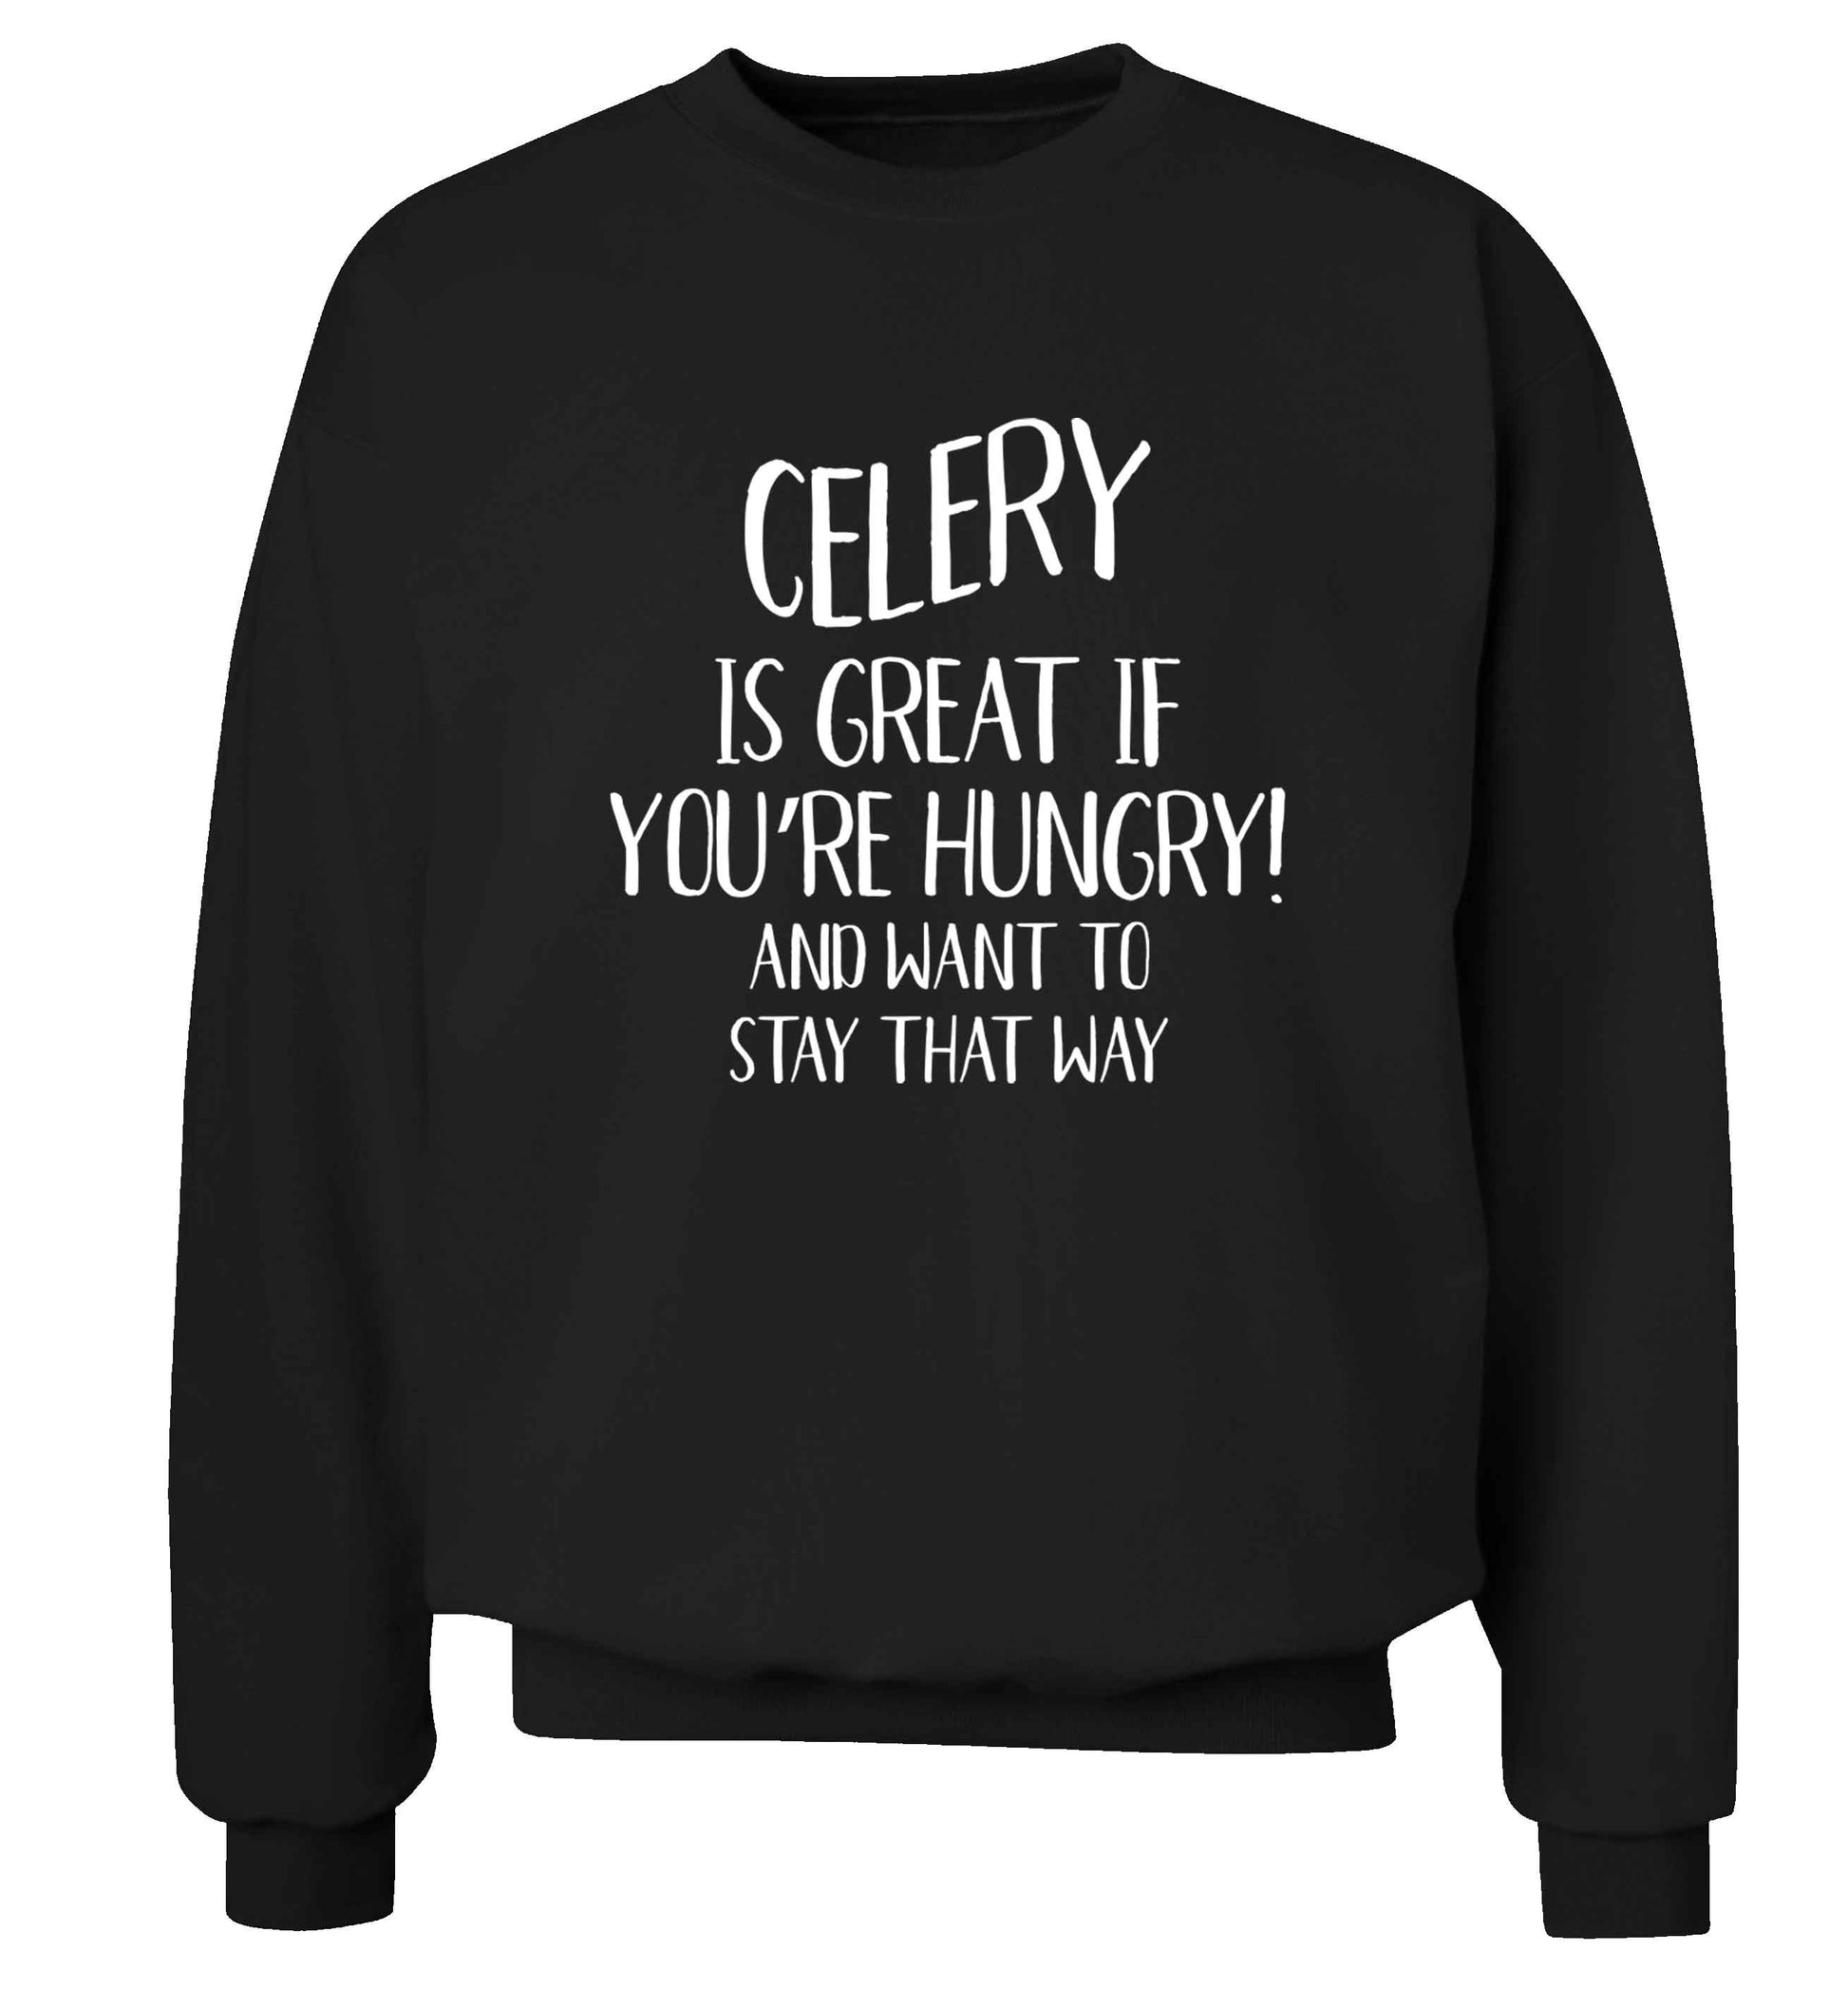 Cellery is great when you're hungry and want to stay that way Adult's unisex black Sweater 2XL